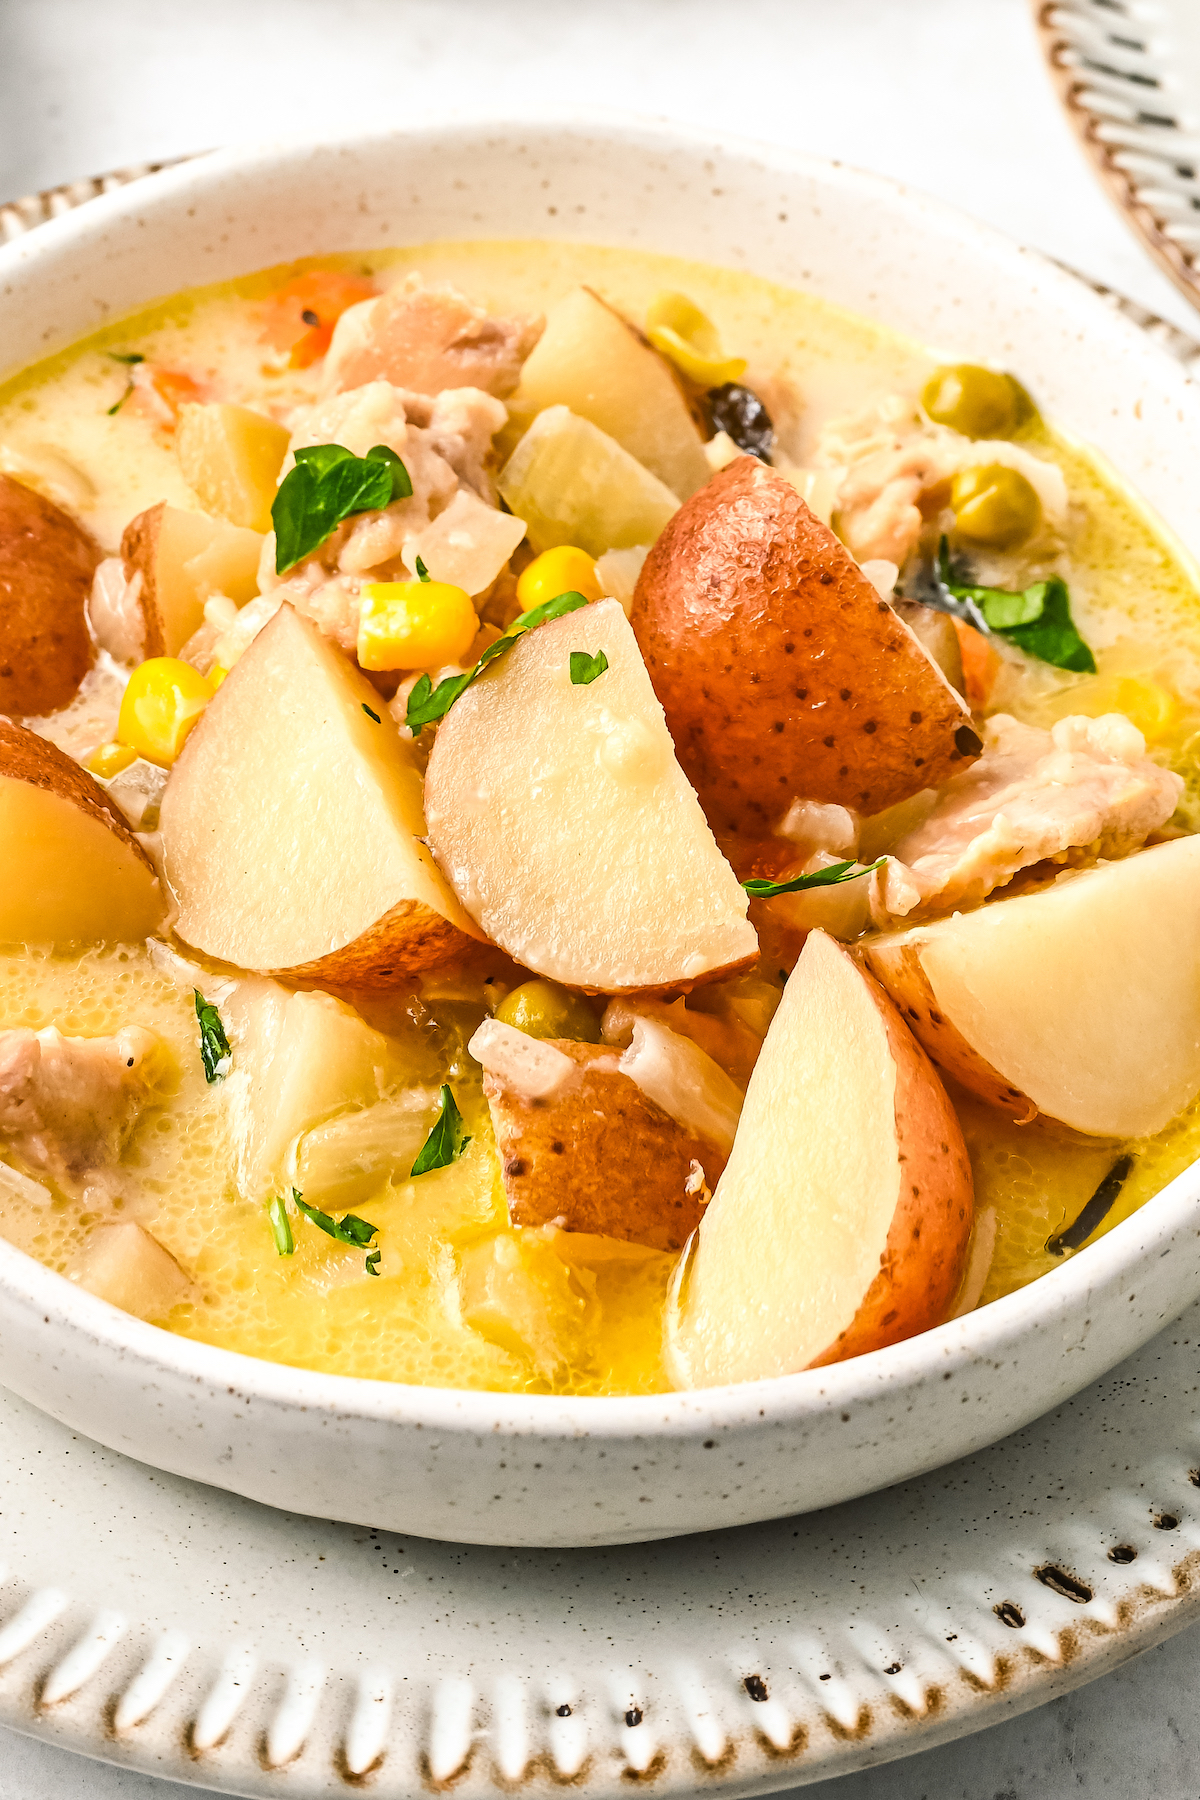 Stew with chicken, potatoes, peas, and other ingredients in a white bowl on a dinner plate.